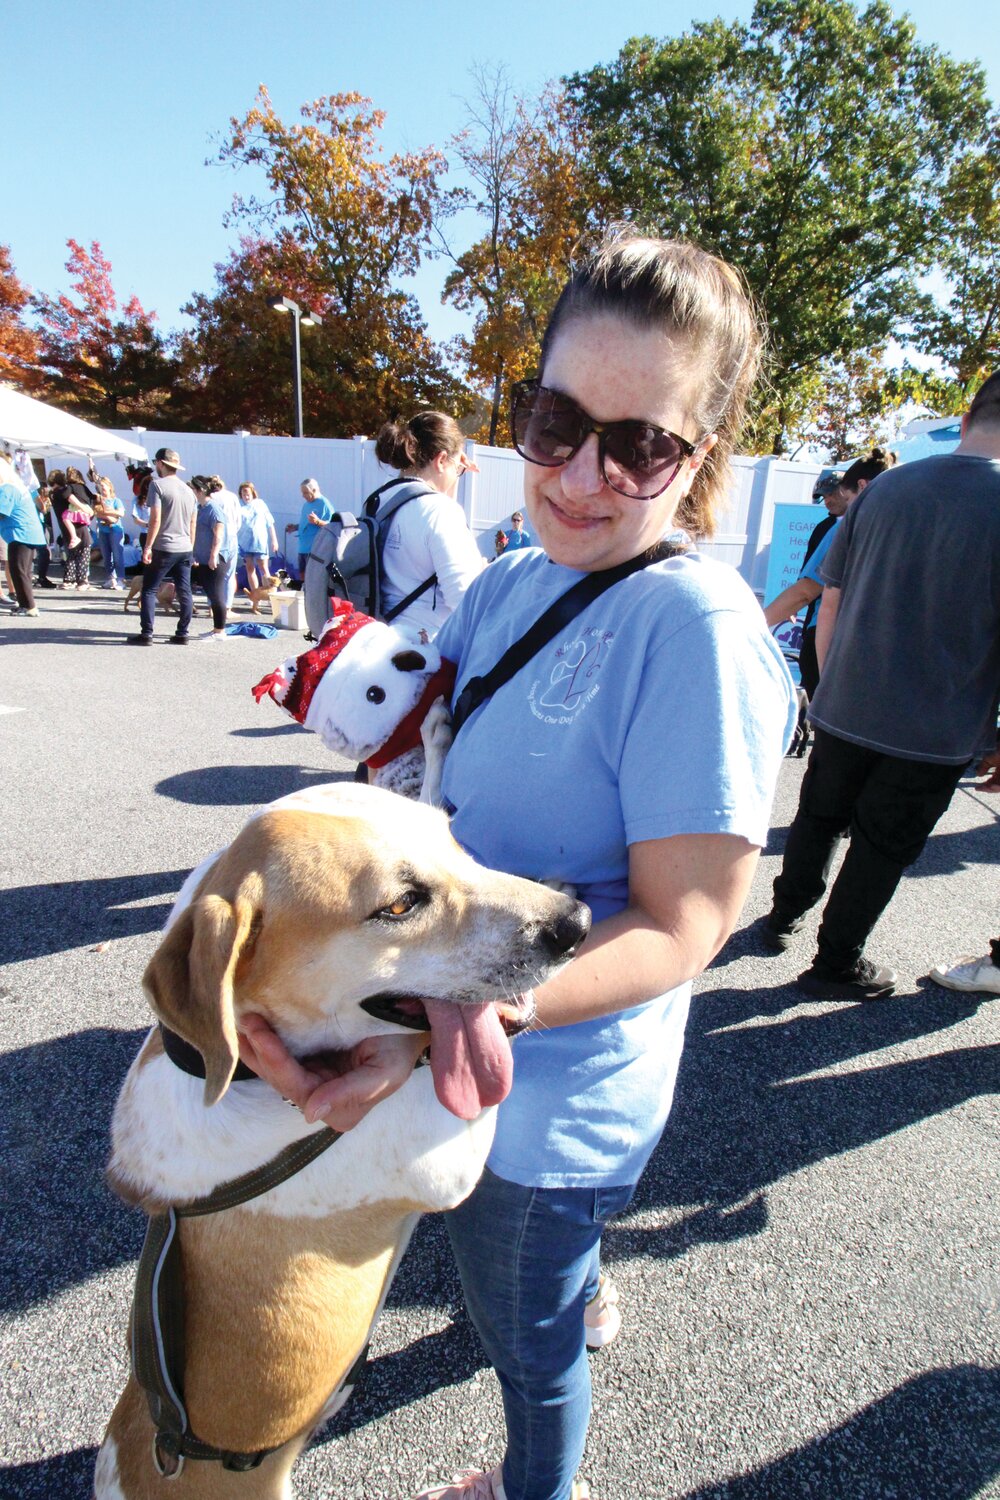 TEMPORARY MOM: Pam Morin with William at the adoption event.  William displayed his friendly disposition greeting dogs and people with wags.